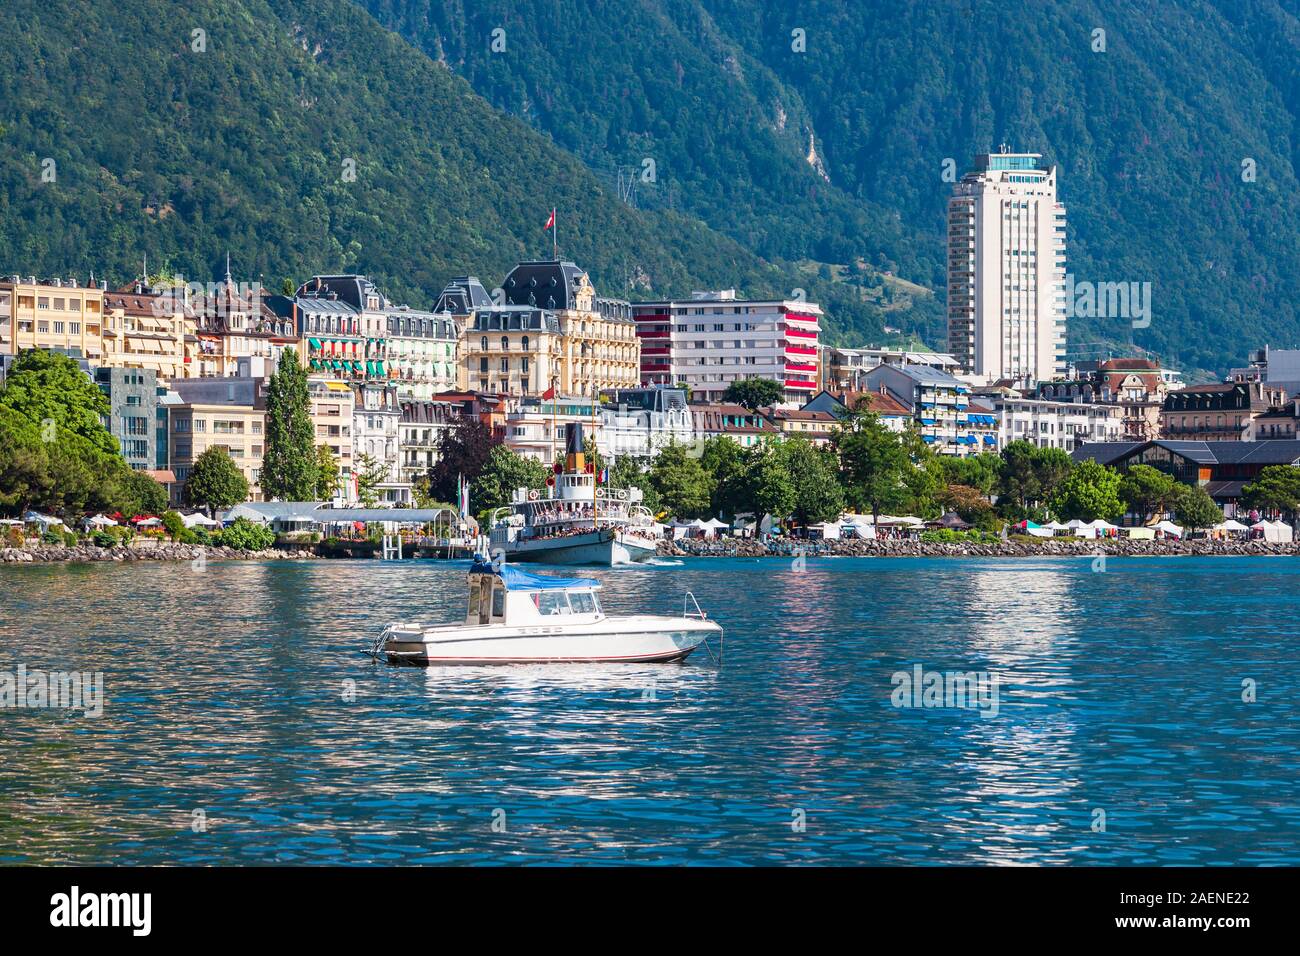 Montreux harbor with yachts and boats. Montreux is a town on the Lake Geneva at the foot of the Alps in Switzerland Stock Photo